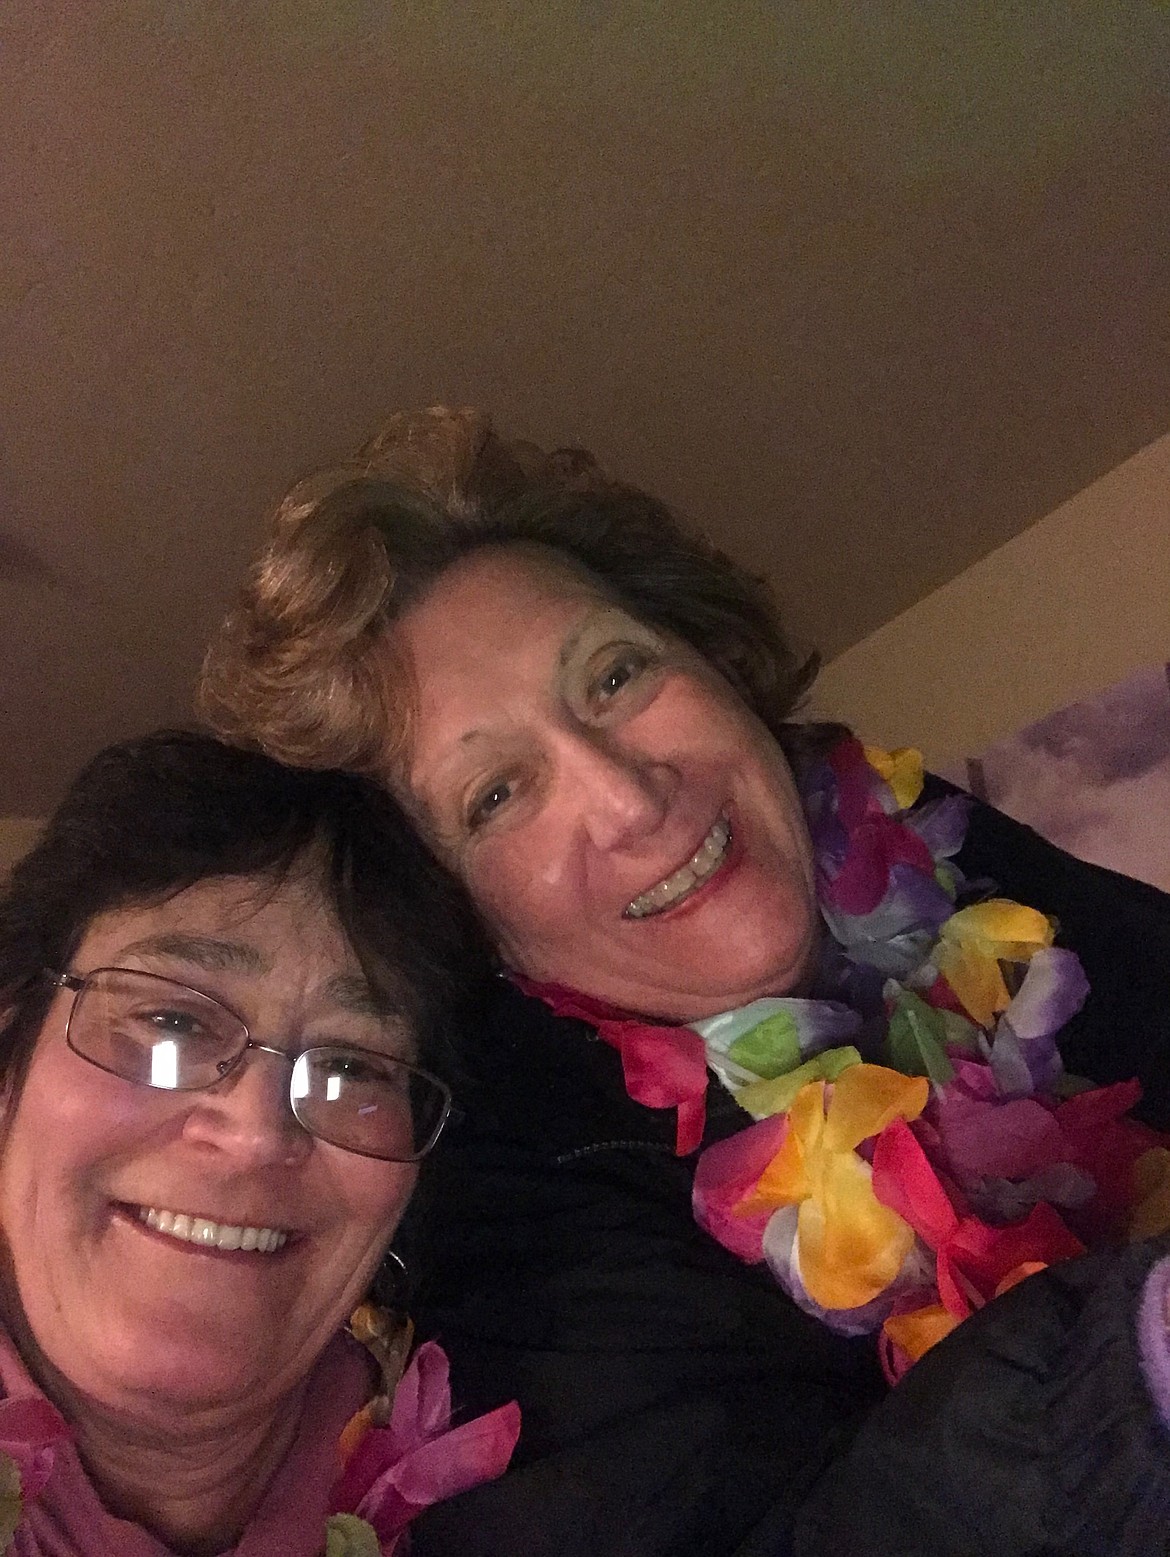 Janet Pepos and Tina Lawler at her Margaritaville themed birthday party. (photo provided)